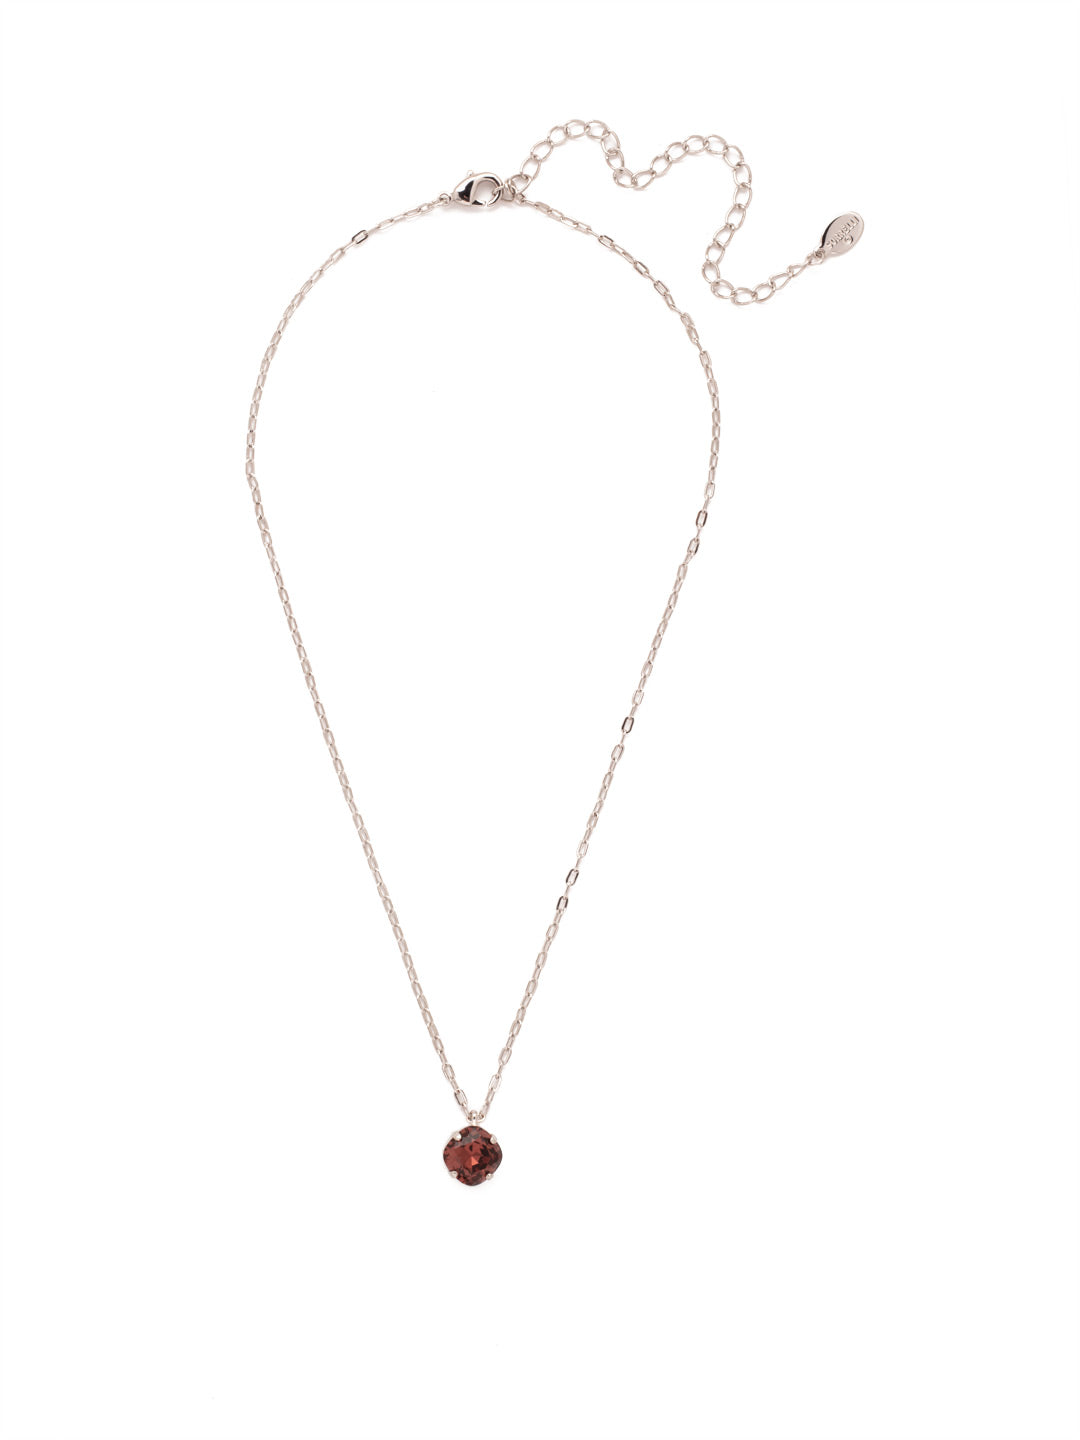 Siren Pendant Necklace - NEP22RHBUR - With a cushion-cut crystal and delicate chain, the Siren Pendant  will add a litle sparkle to your everyday look. From Sorrelli's Burgundy collection in our Palladium Silver-tone finish.